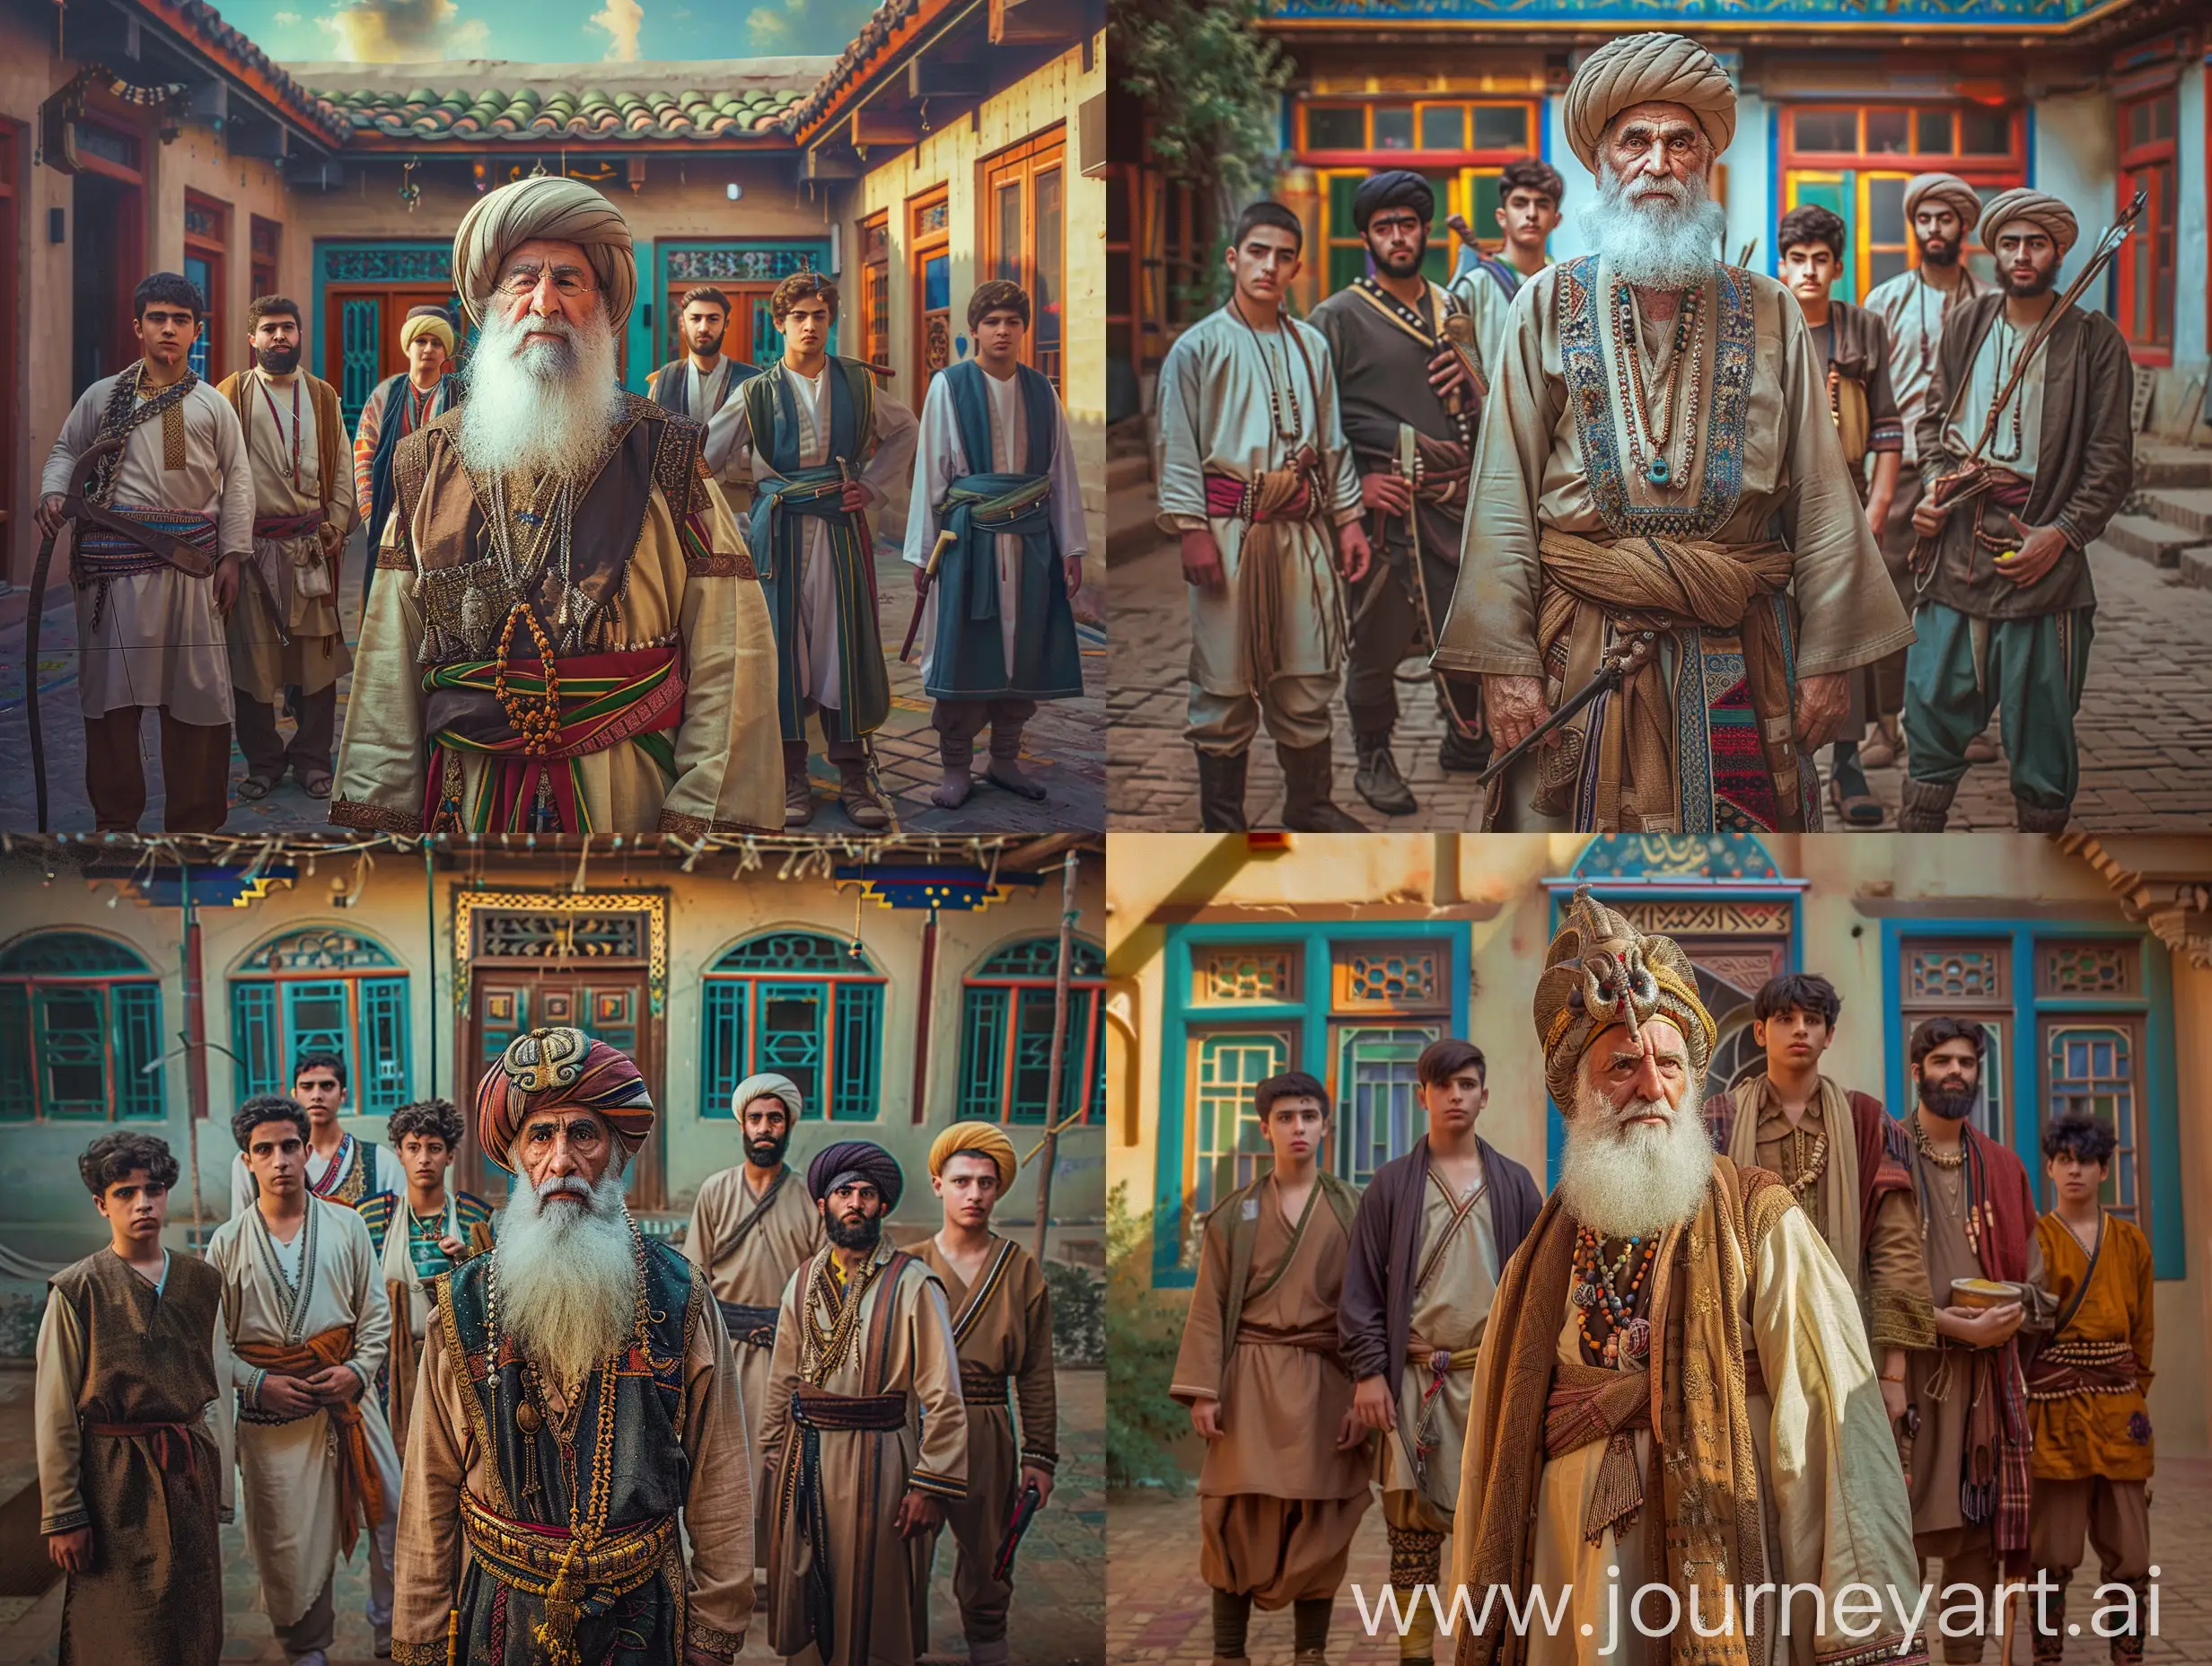 Ancient-Persian-Elder-and-Seven-Youths-in-Traditional-Attire-Amid-Courtyard-Wonders